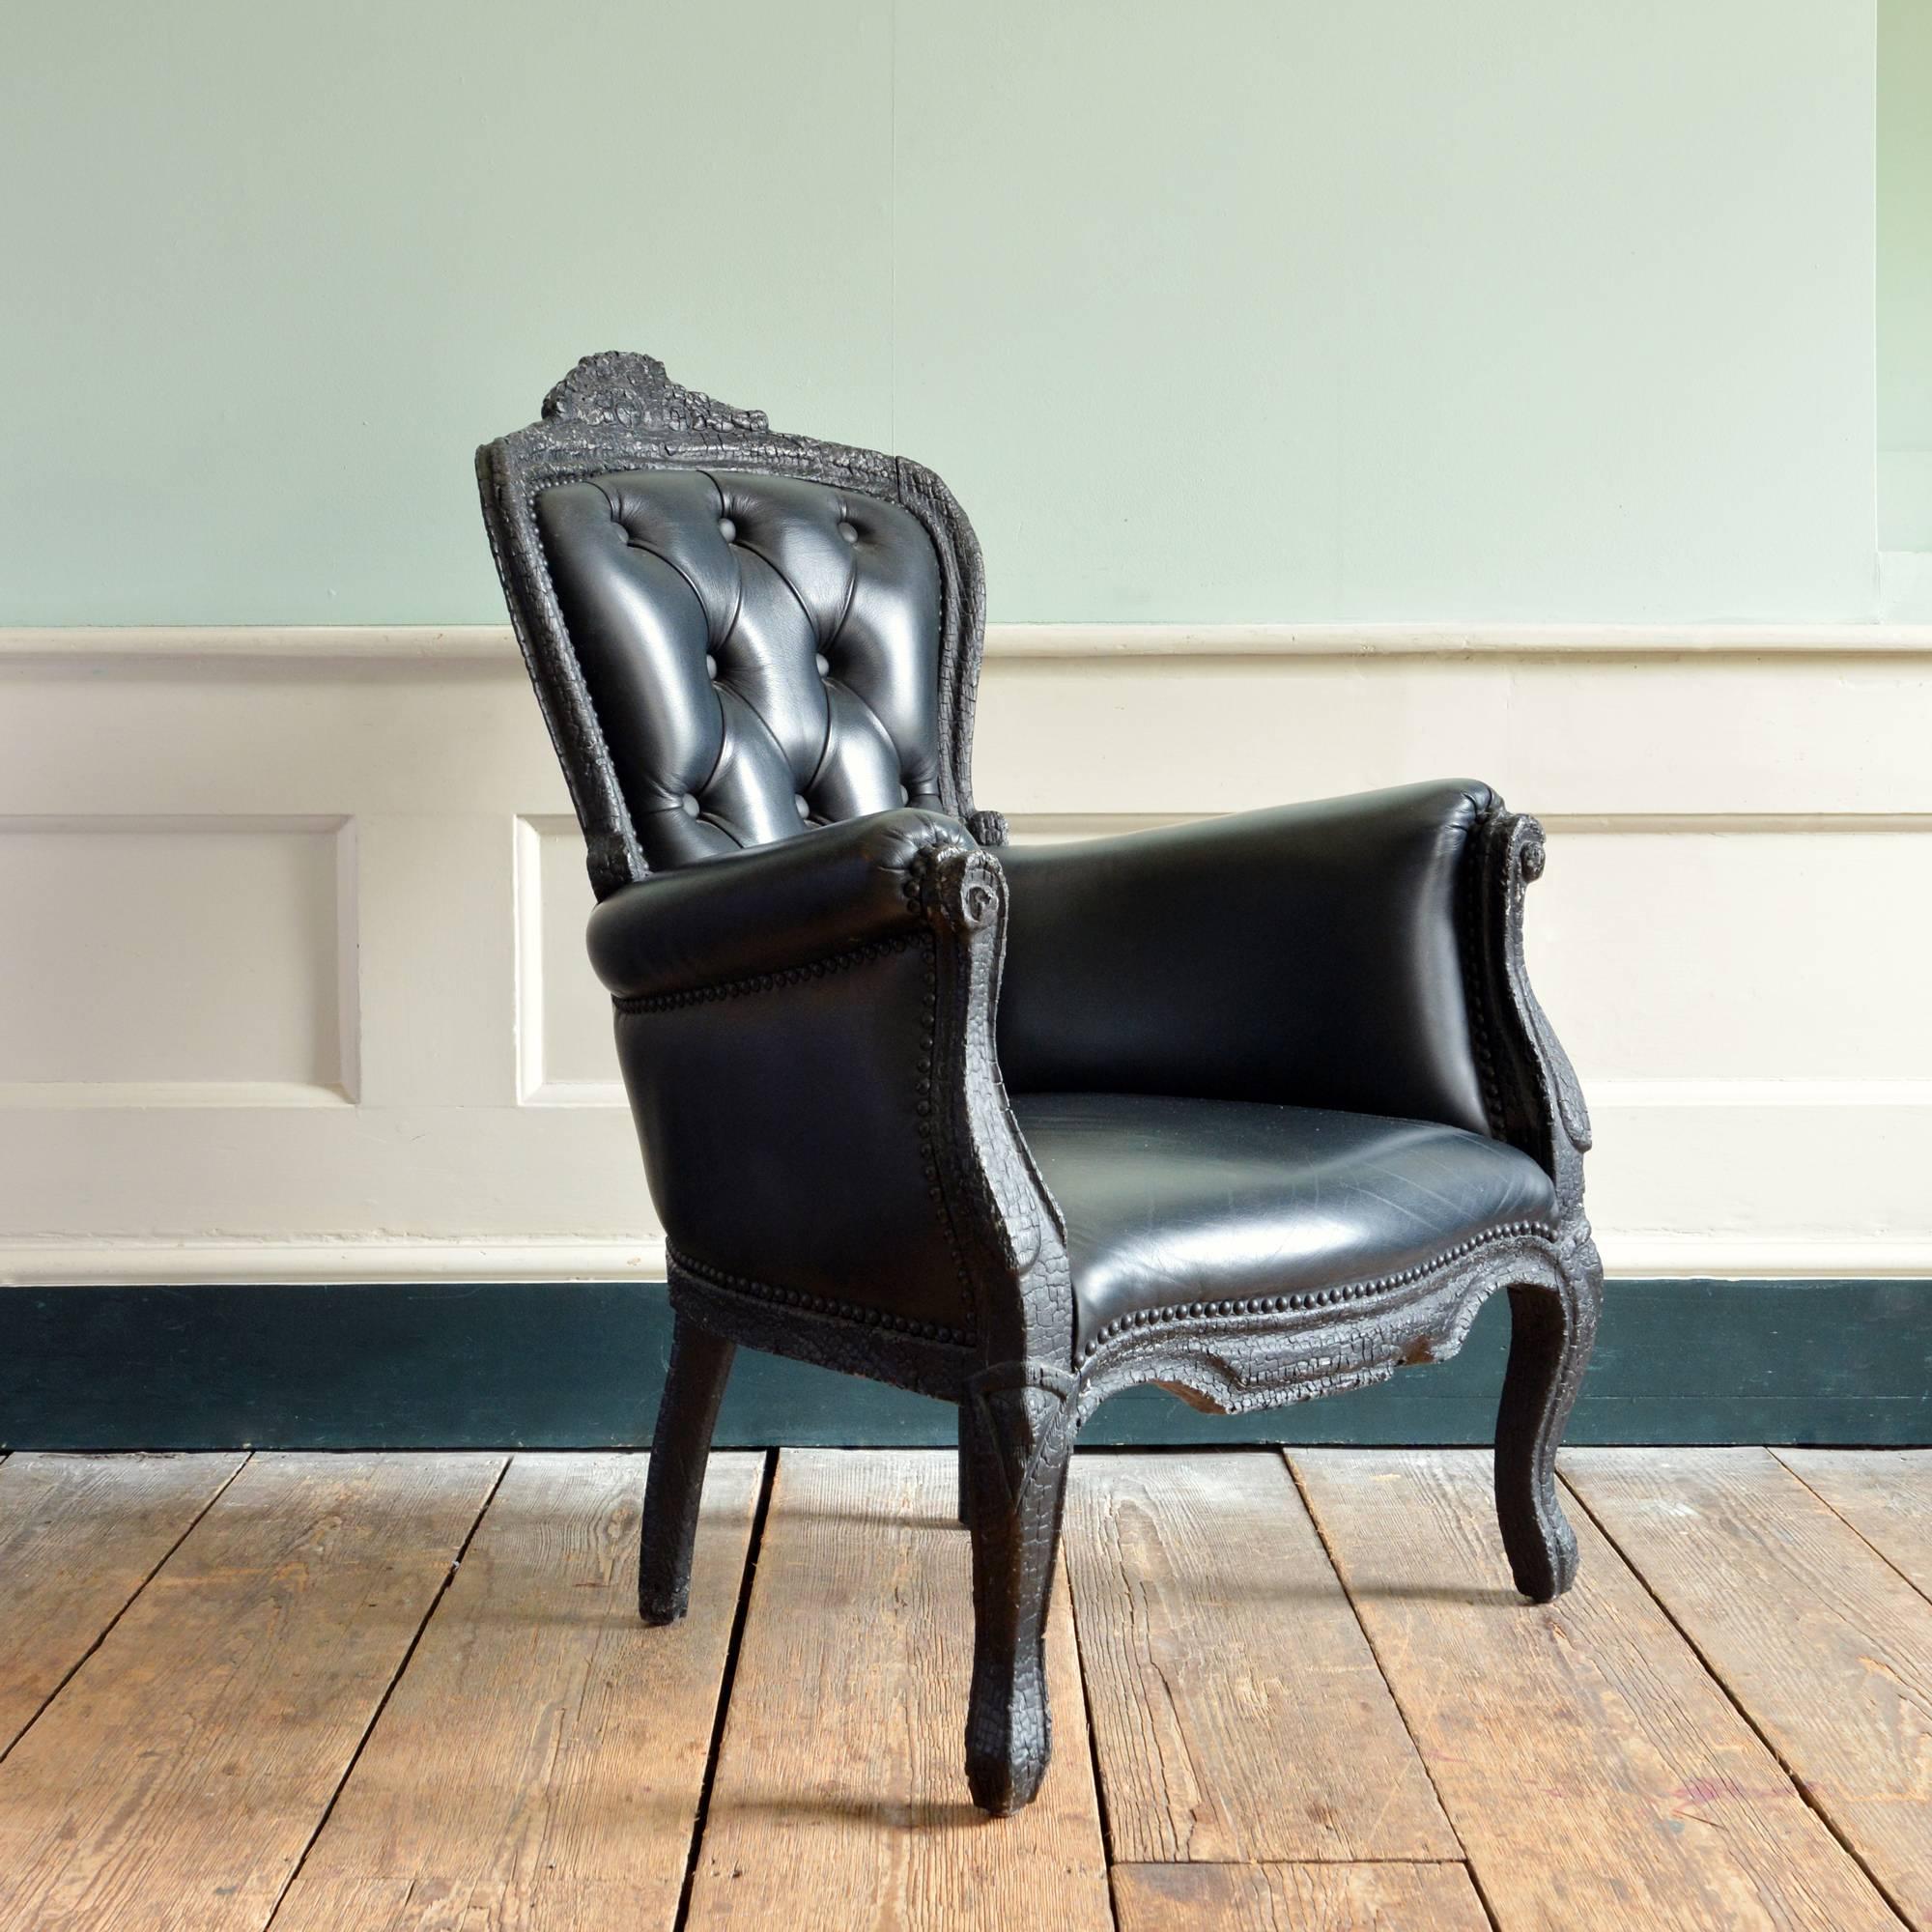 A 'Smoke' armchair, designed by Maarten Baas for Moooi to a French Rococo design, made from burnt solid wood with epoxy resin and leather upholstery. 

Measures: 102 cm (40¼